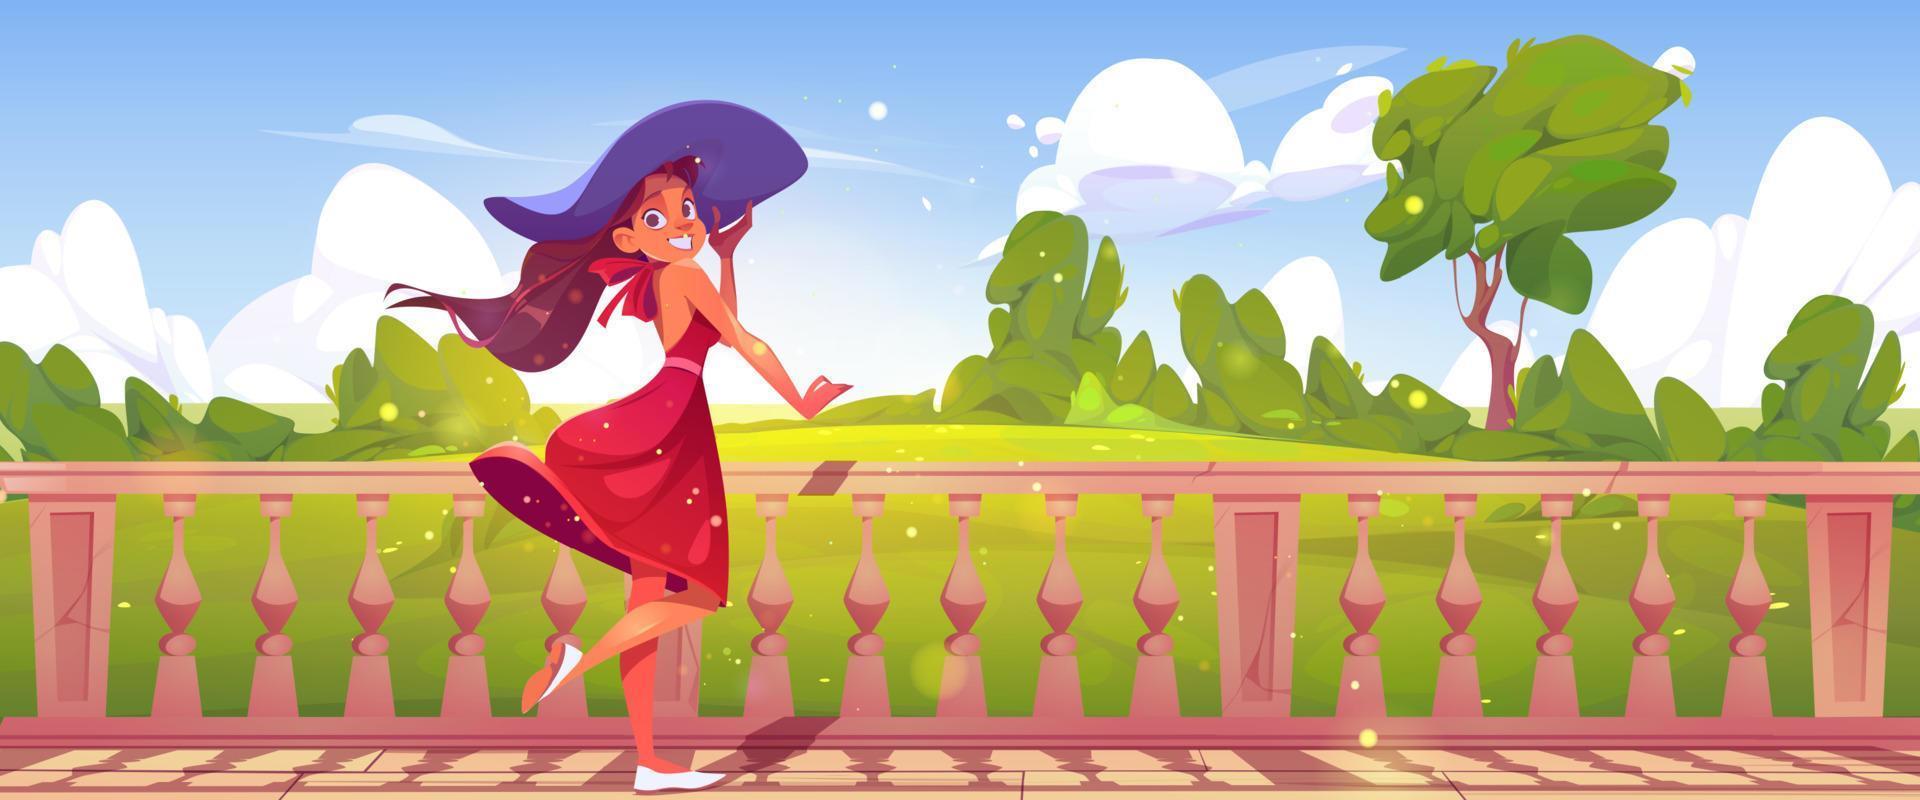 Beautiful girl on house terrace with balustrade vector